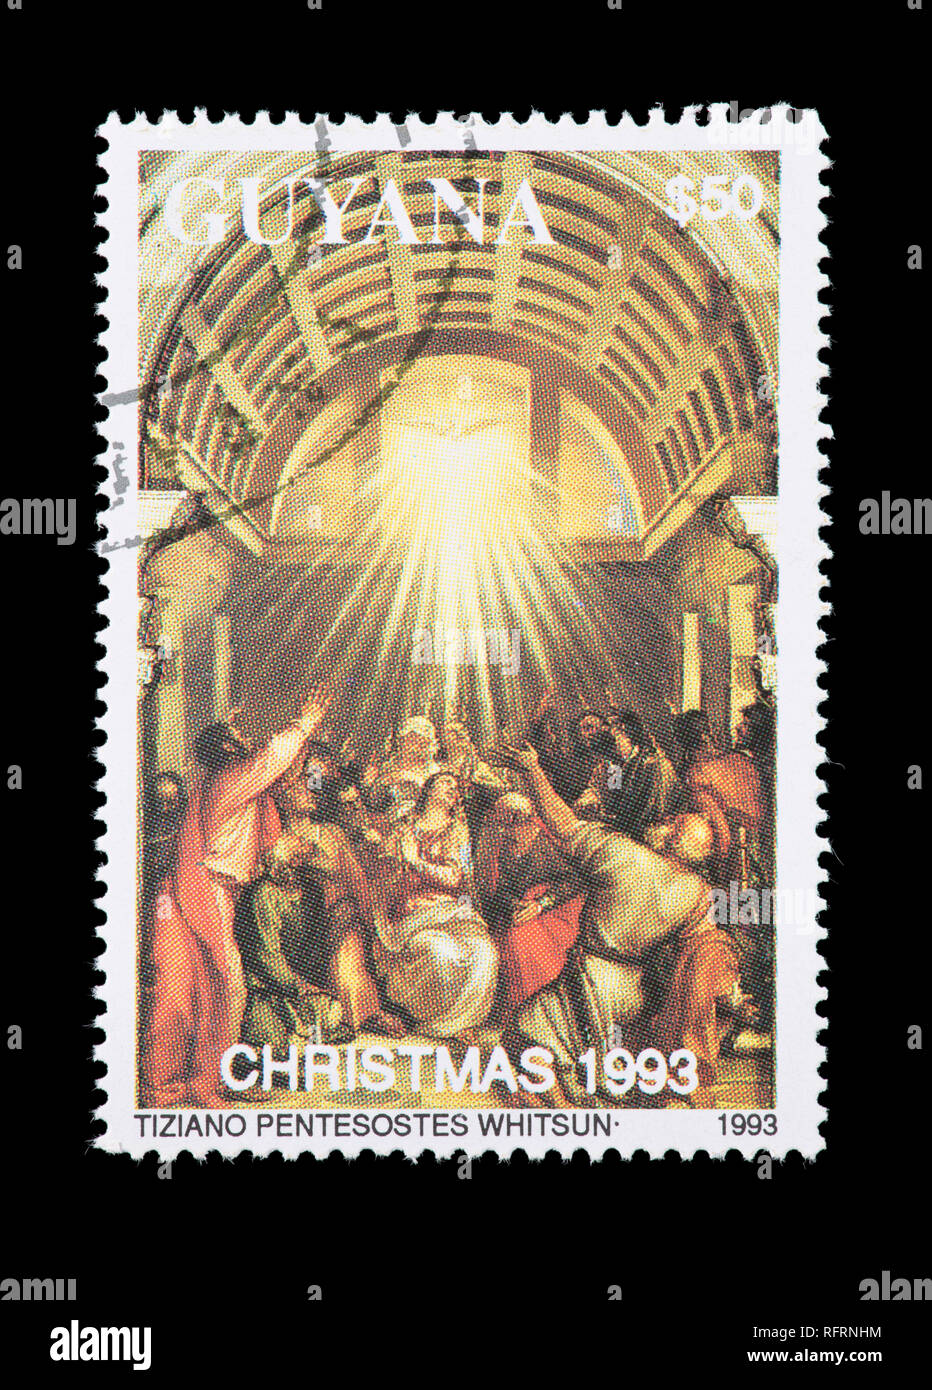 Postage stamp from Guyana depicting the Titian painting Pentecost. Stock Photo